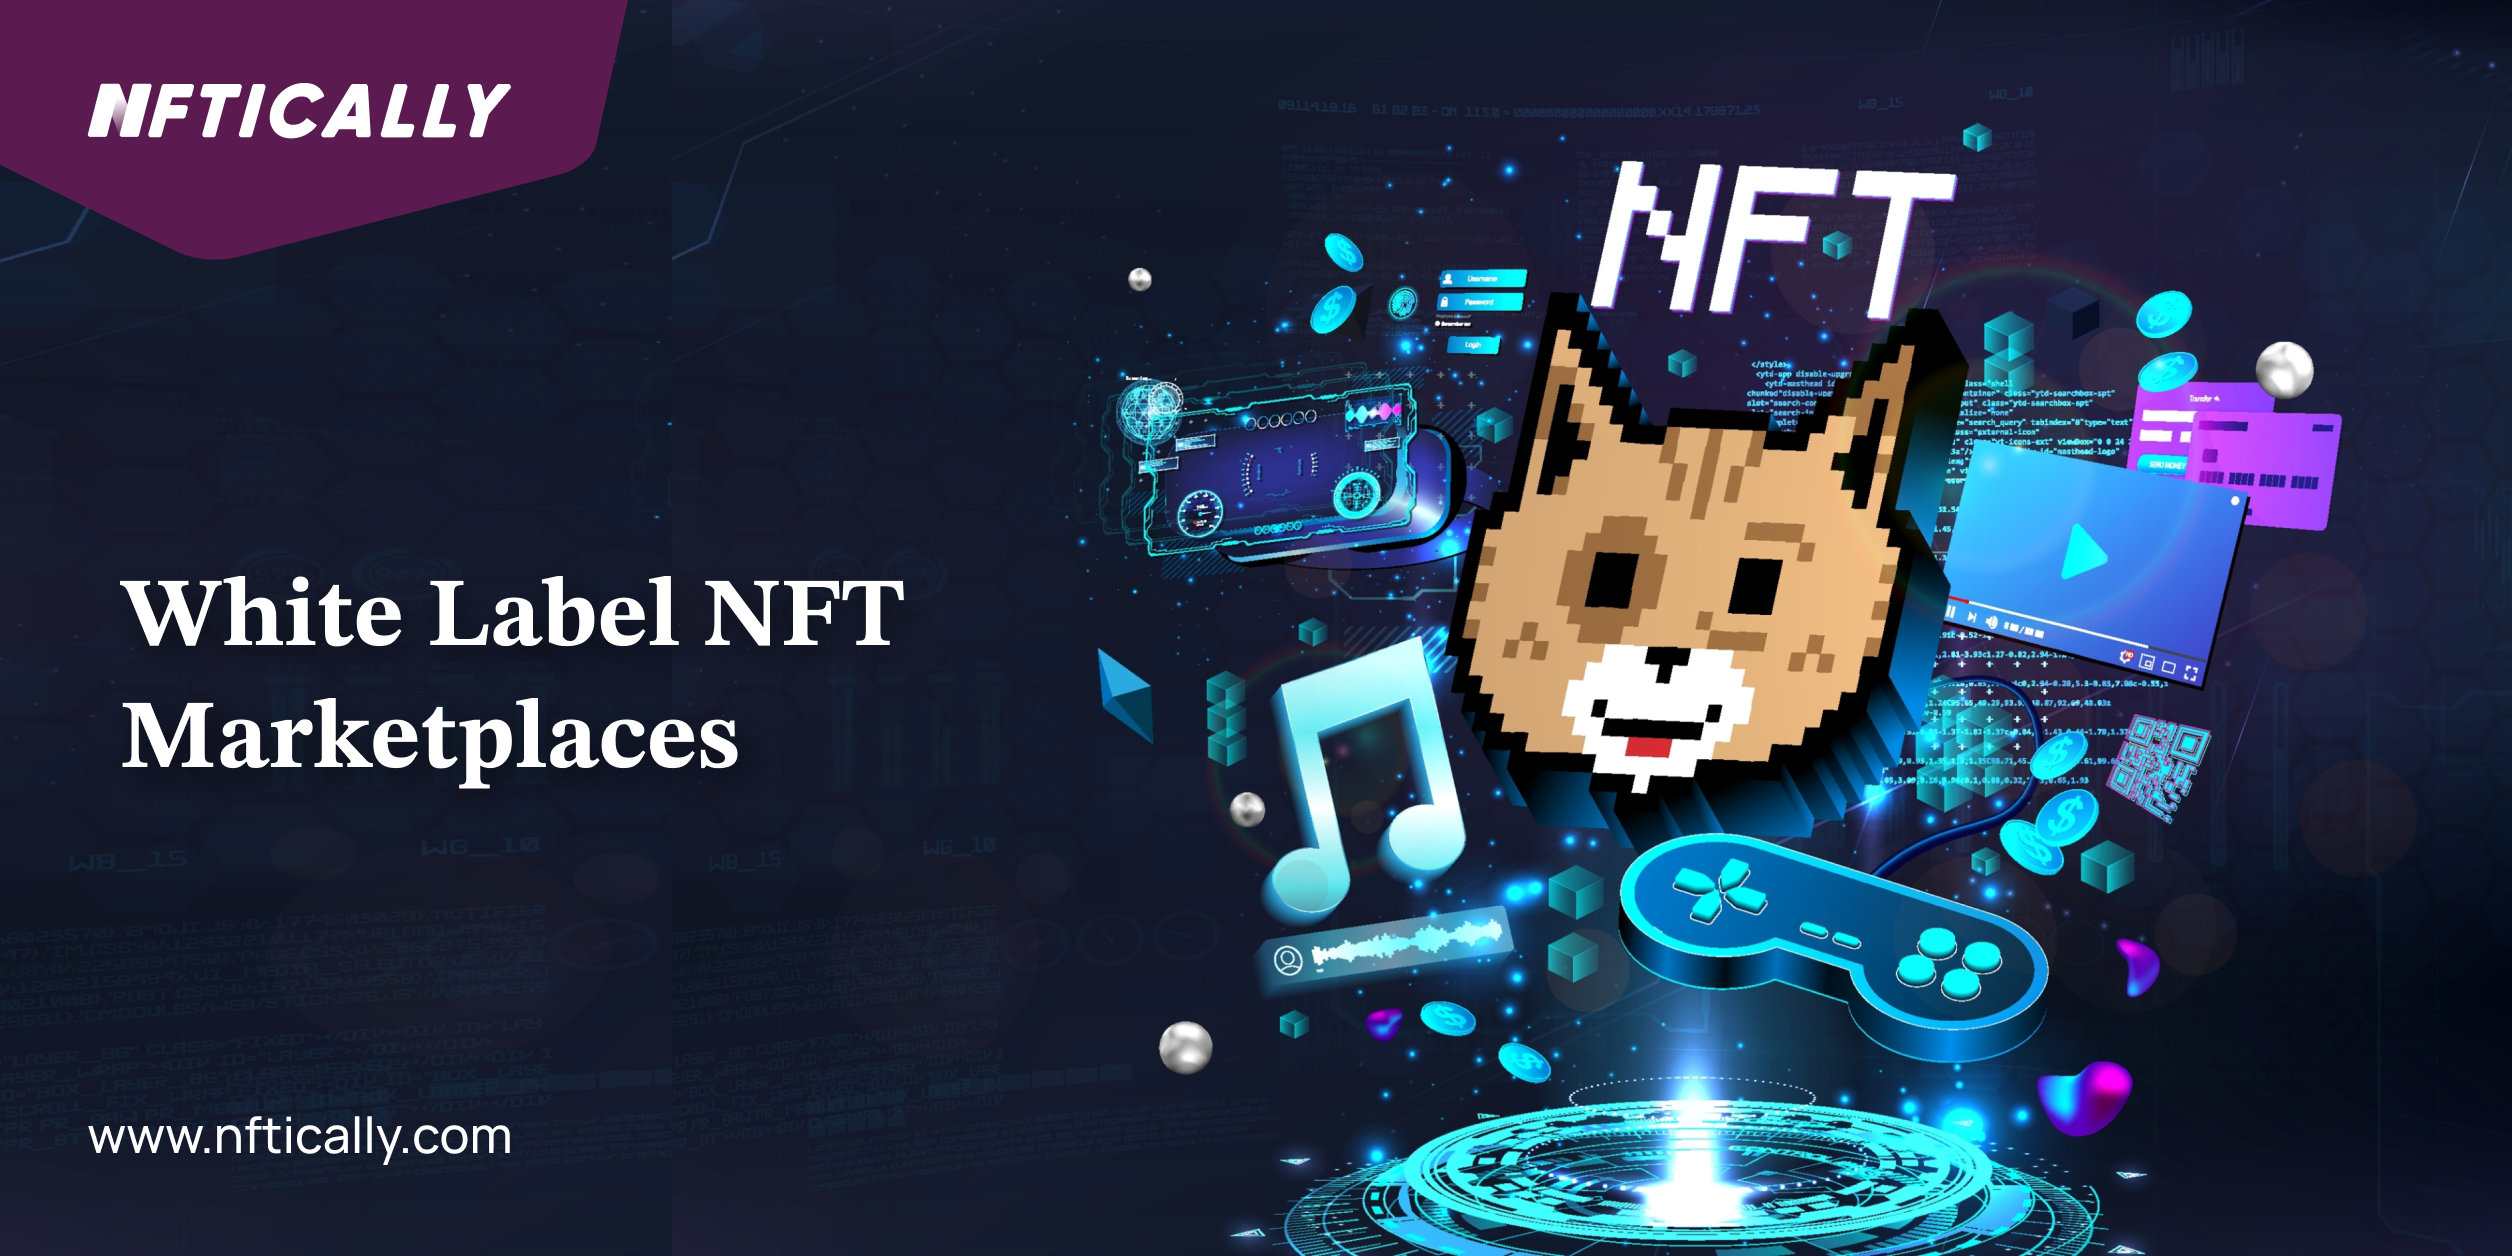 NFTICALLY: A White Label NFT Marketplace